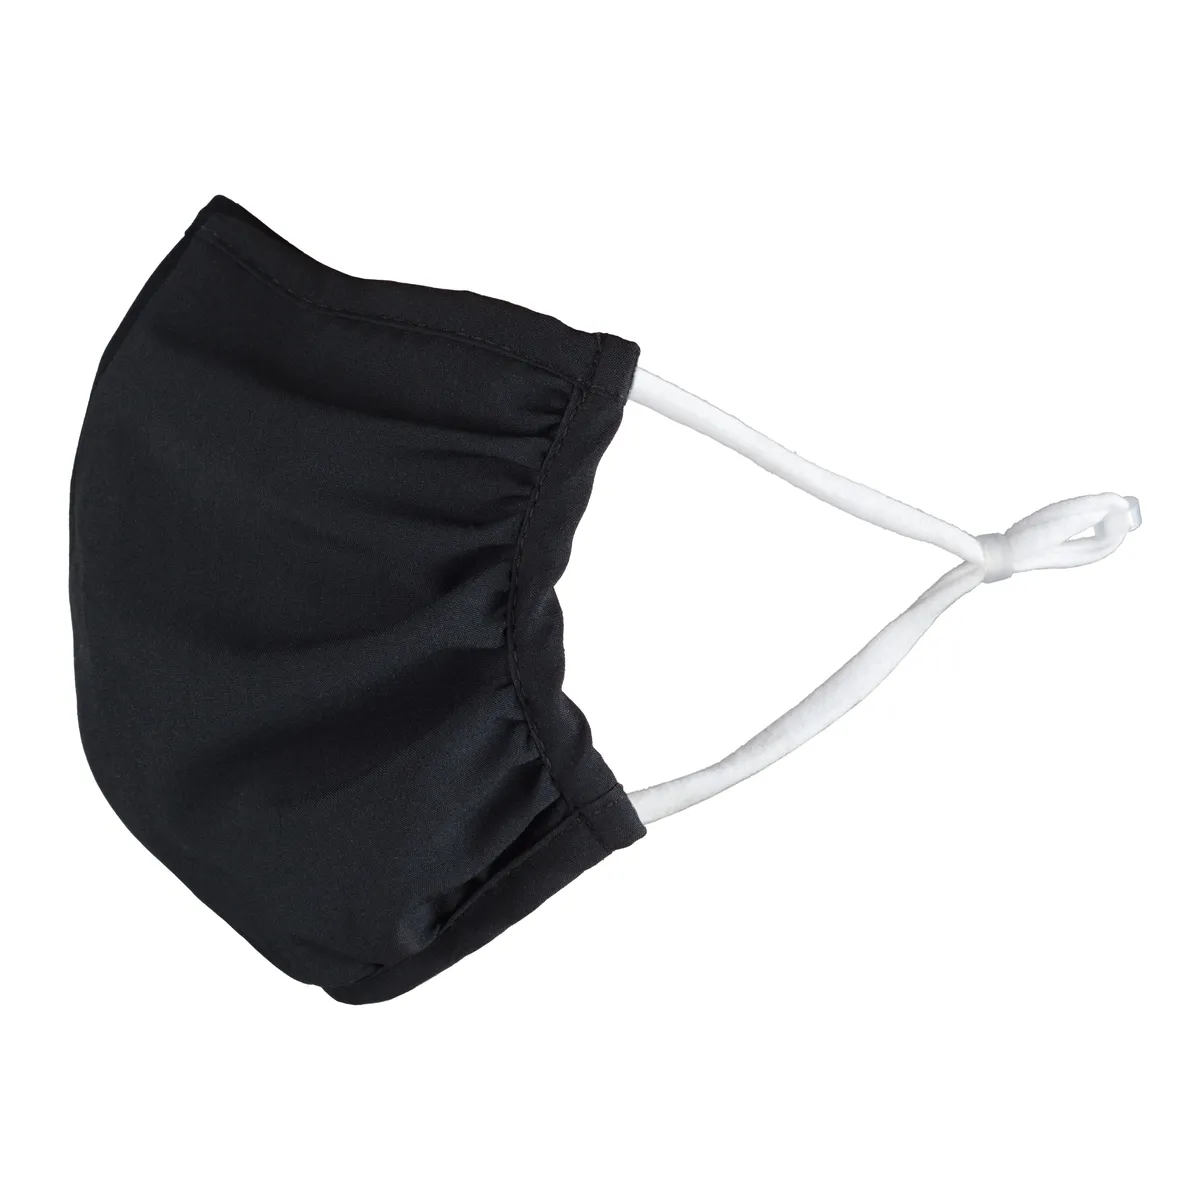 Reusable Face Covering Adult Size Black Profile View